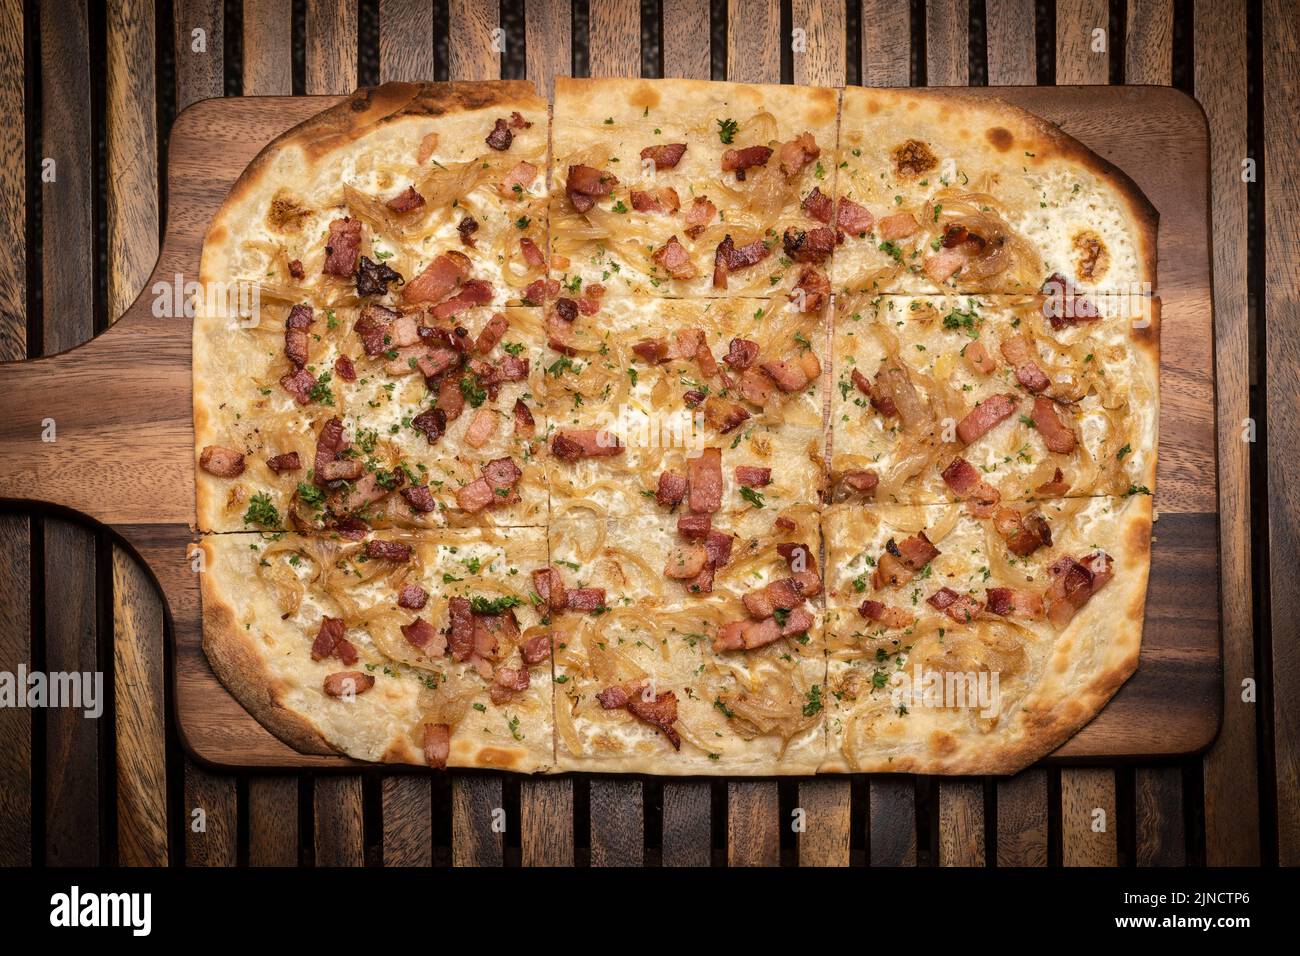 Flammkuchen tarte flambee rectangular pizza with bacon and chicken on wood table background Stock Photo